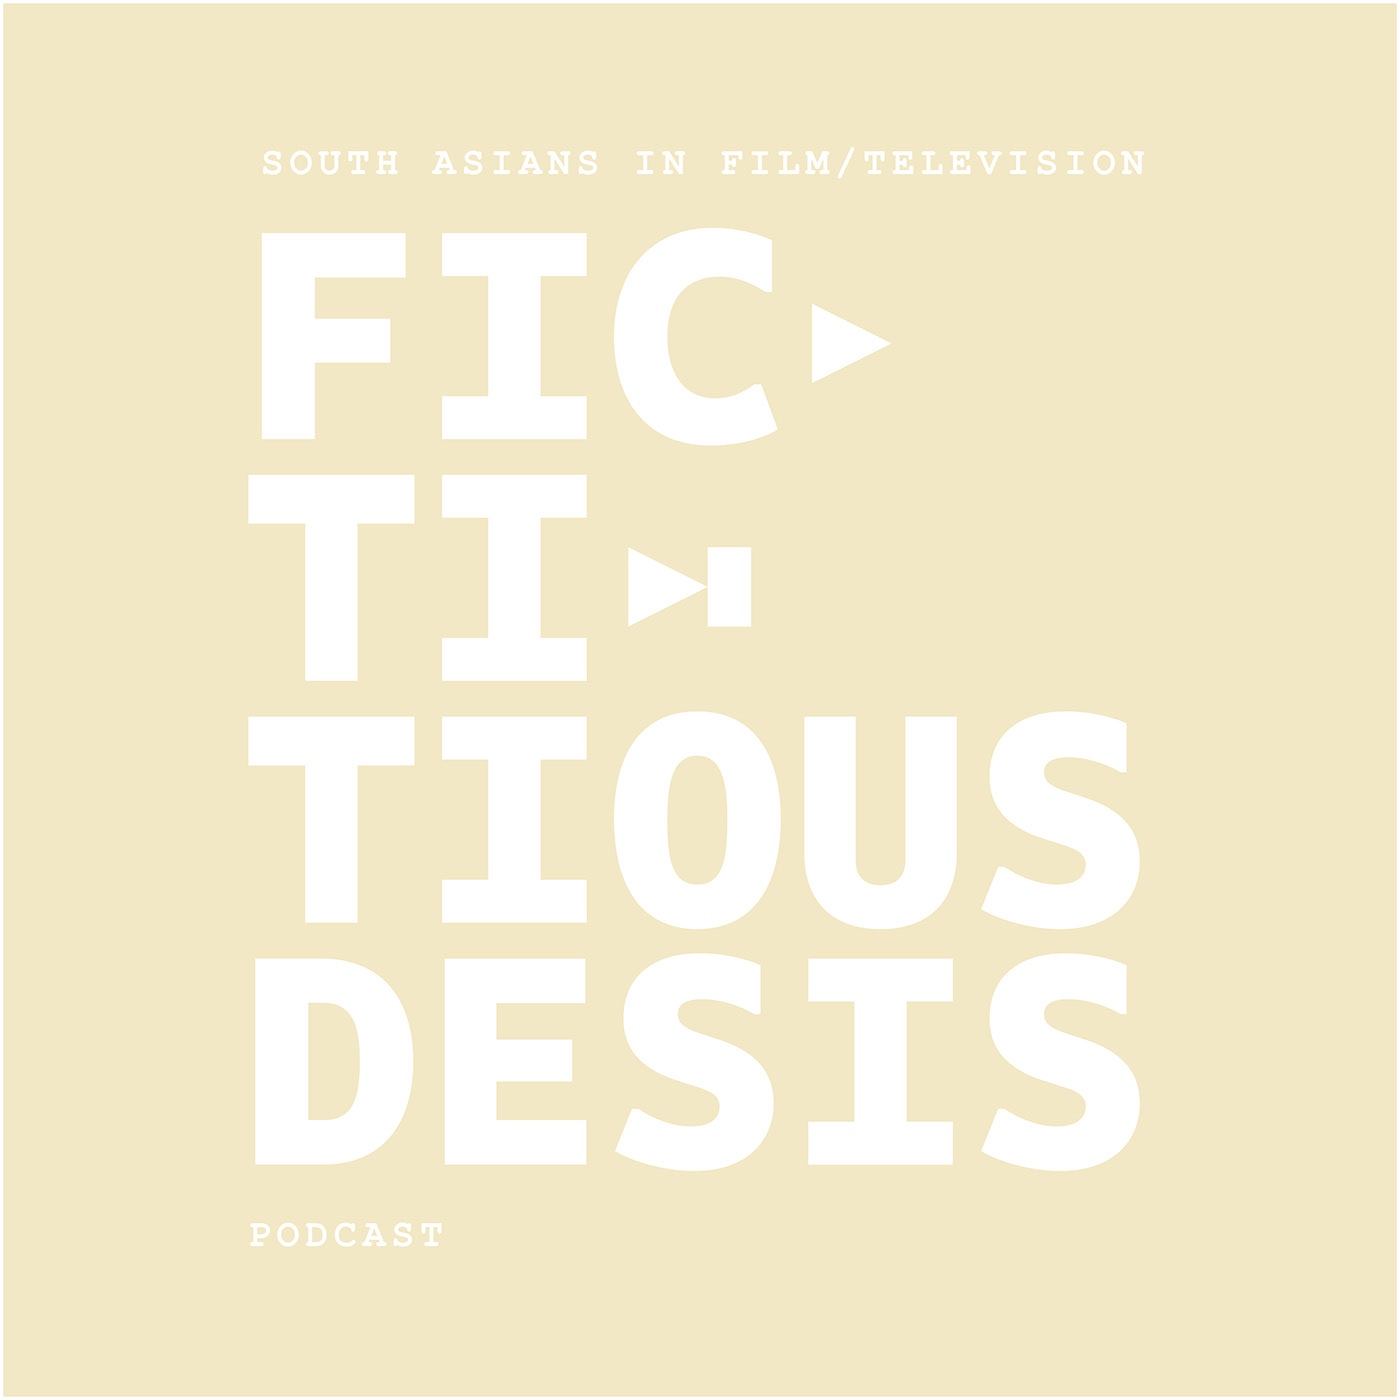 branding  podcast South Asians filmtelevision DESIS screen printing